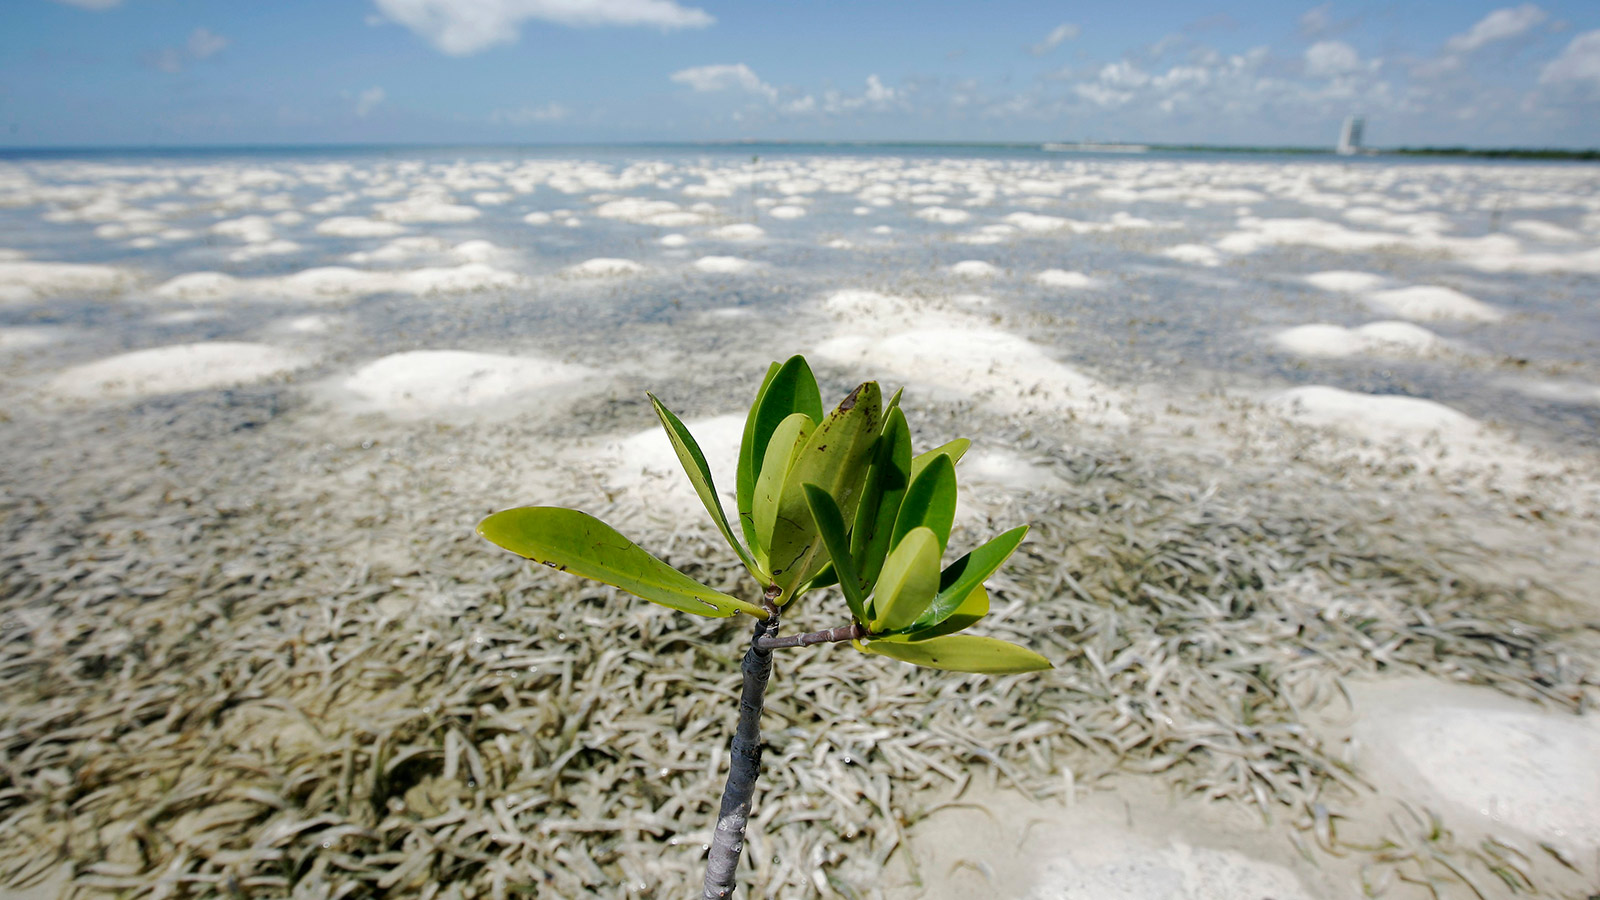 A mangrove plant grows on a shore in Cancun